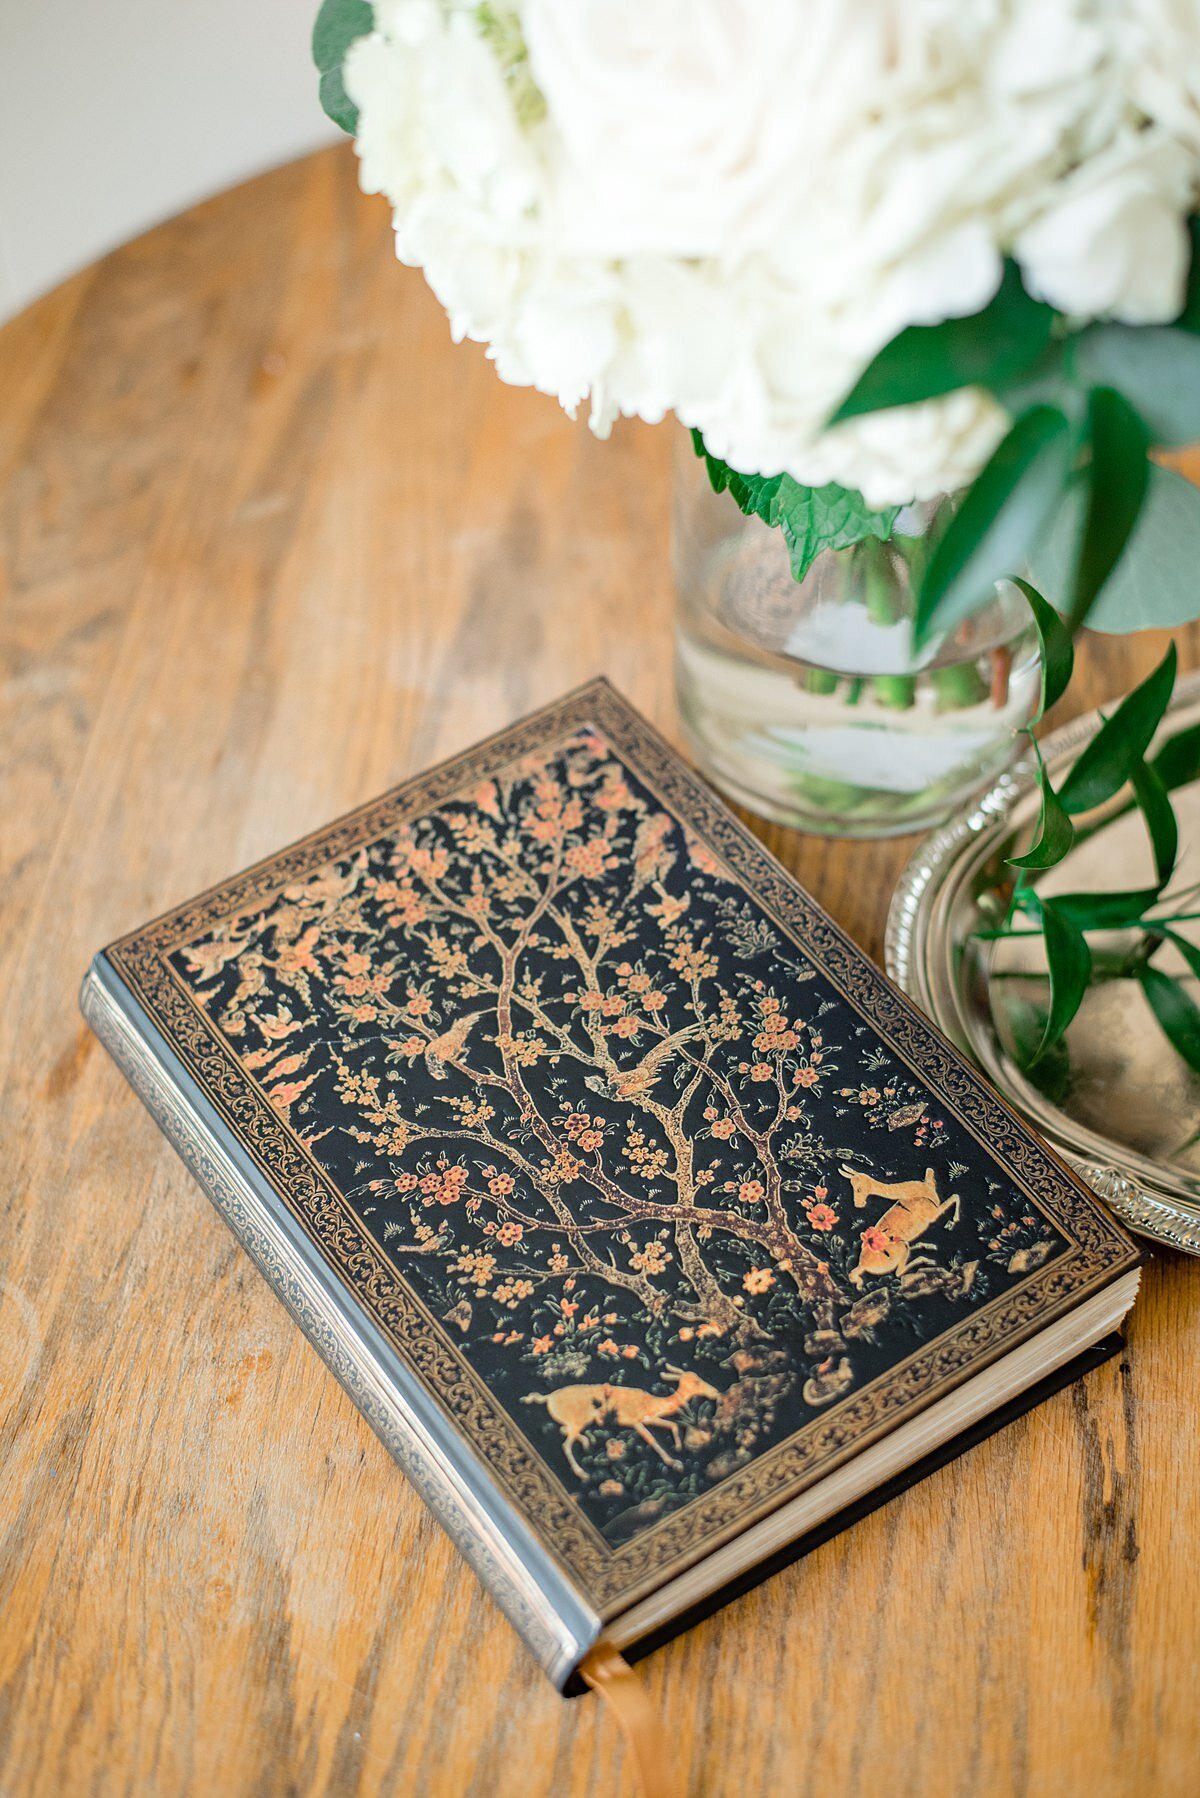 The officiant's ceremony book sits on a wooden table. The cover of the book is embossed with a gold leaf tree of life and two deer frolicking beneath the tree. To the right of the book is a silver tray and a glass vase with the bride's white bouquet.